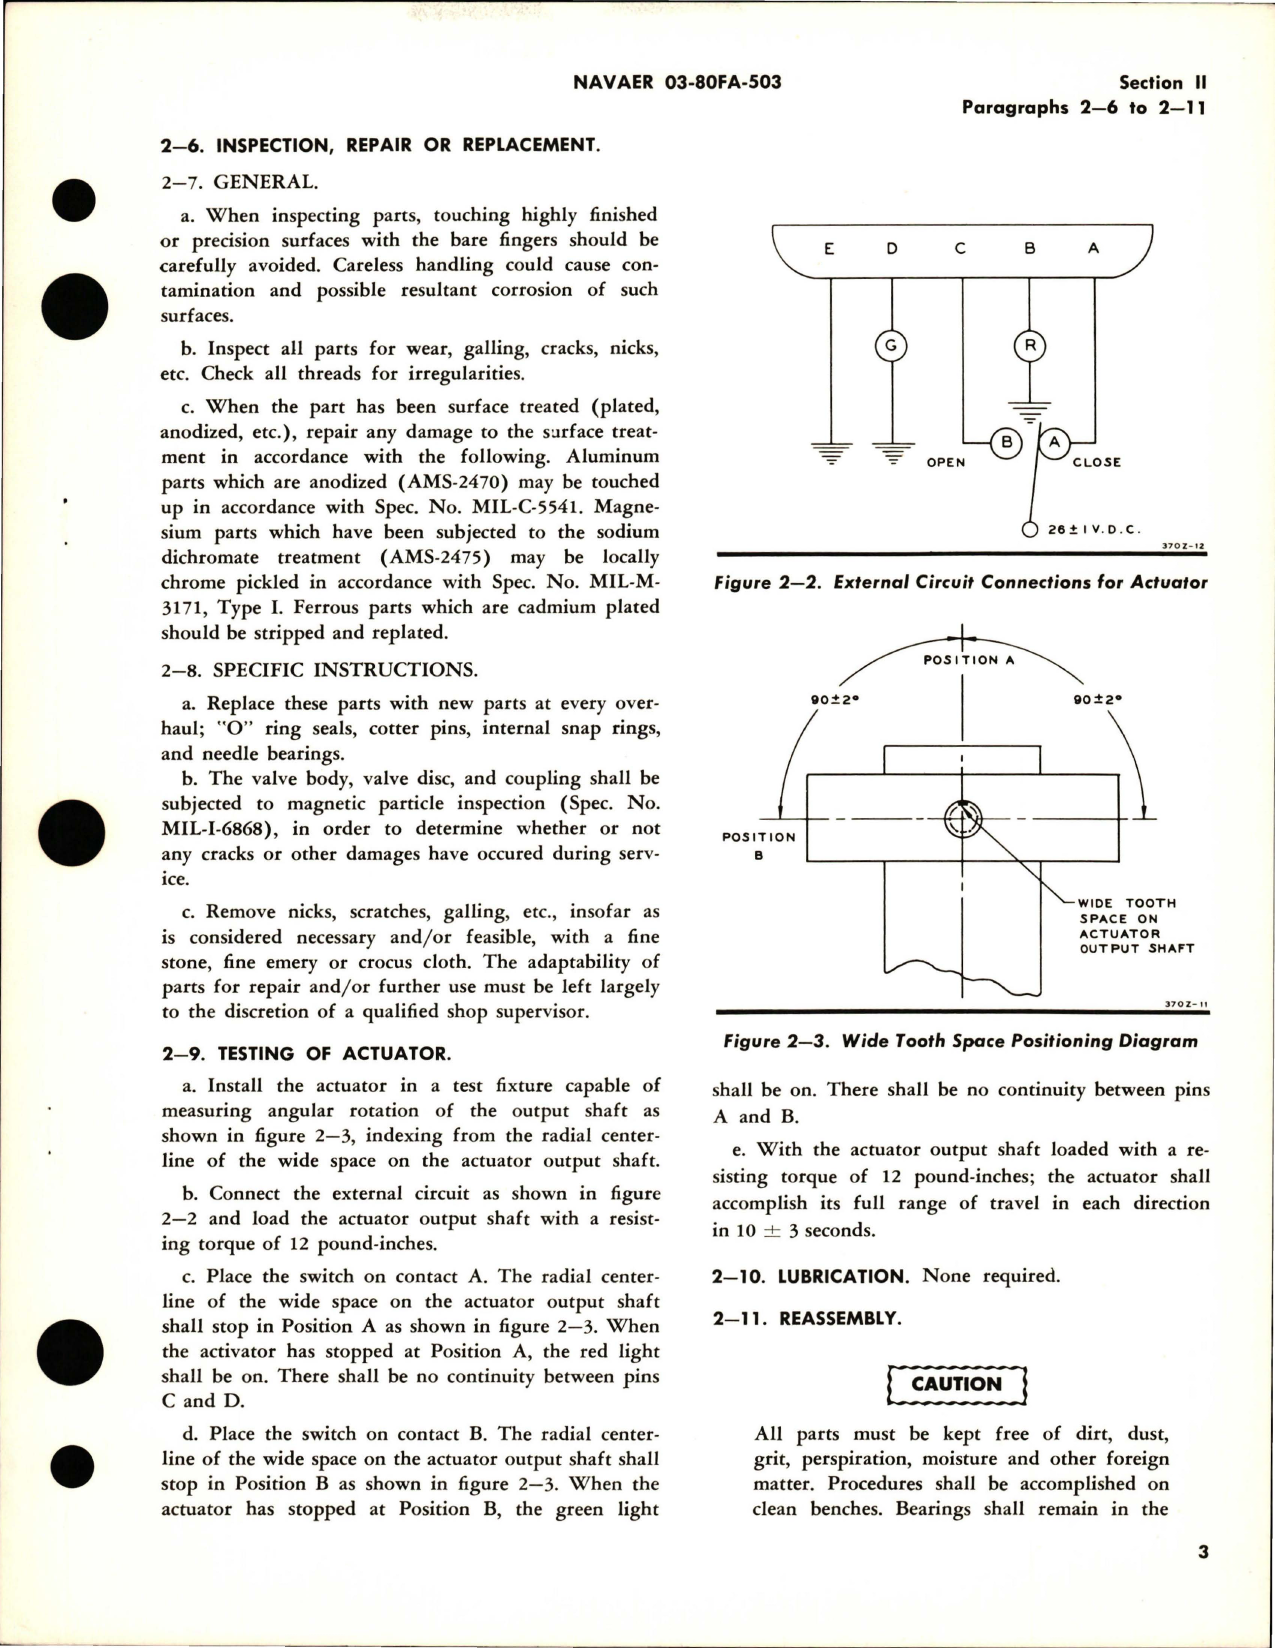 Sample page 7 from AirCorps Library document: Overhaul Instructions for Valve and Actuator Assemblies - Assembly No. 81388, 81399, and 90437